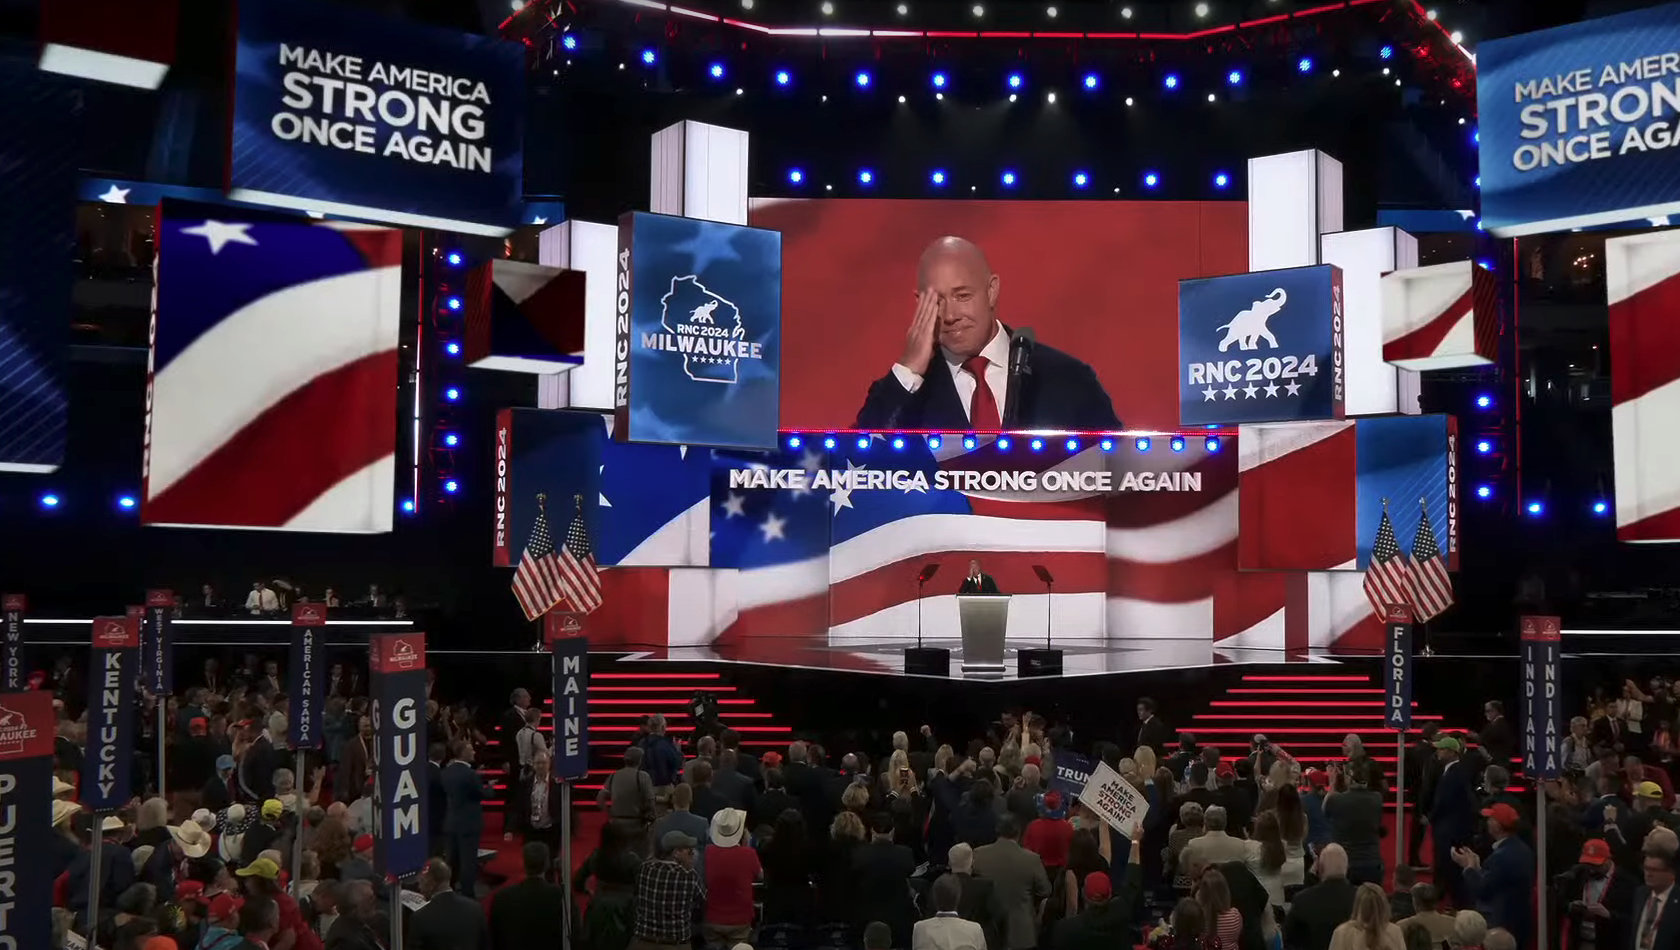 [WATCH] GOP Convention Speech: Make America Strong Once Again!